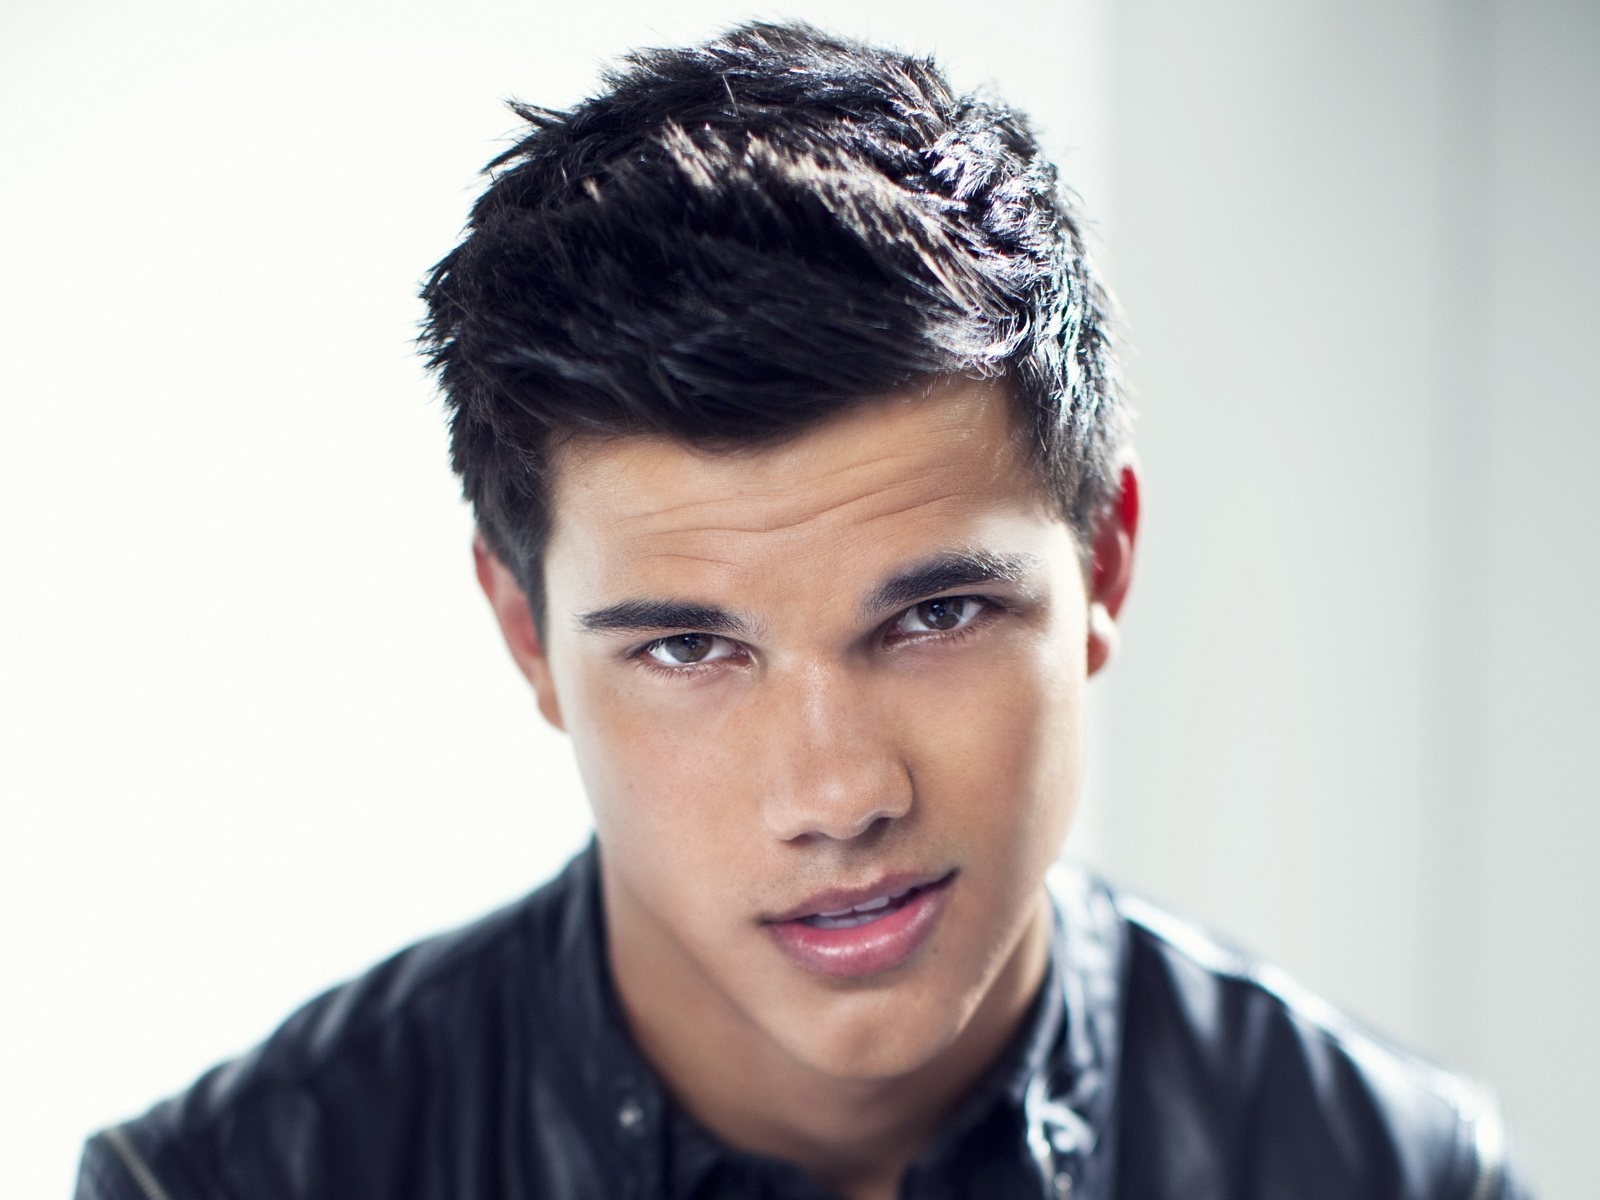 Taylor Lautner Look for 1600 x 1200 resolution